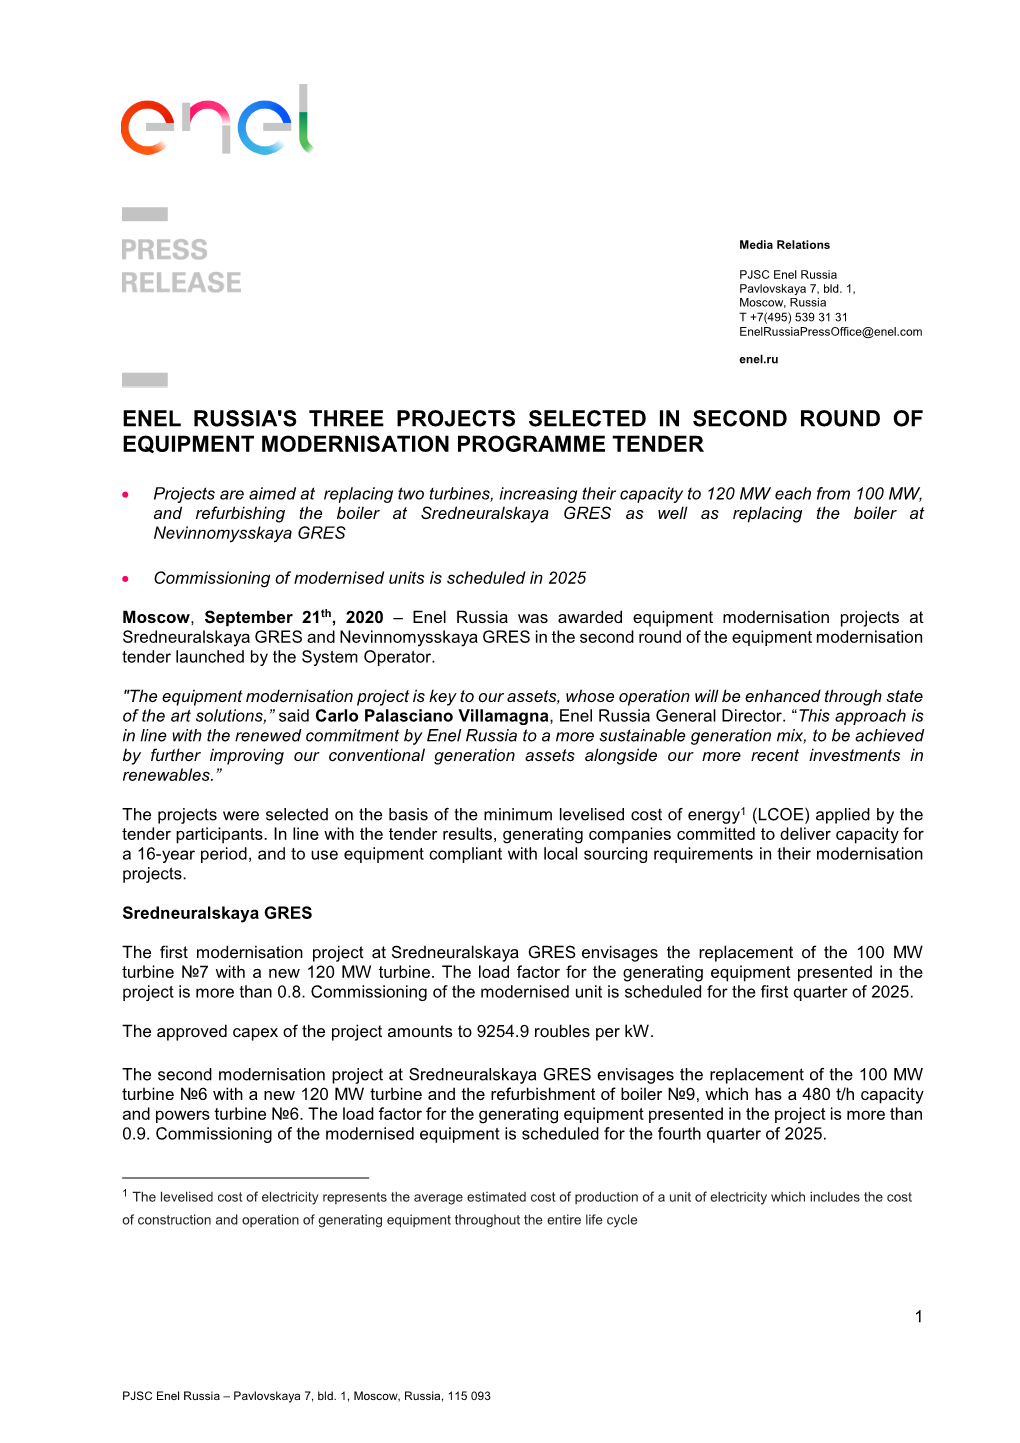 Enel Russia's Three Projects Selected in Second Round of Equipment Modernisation Programme Tender